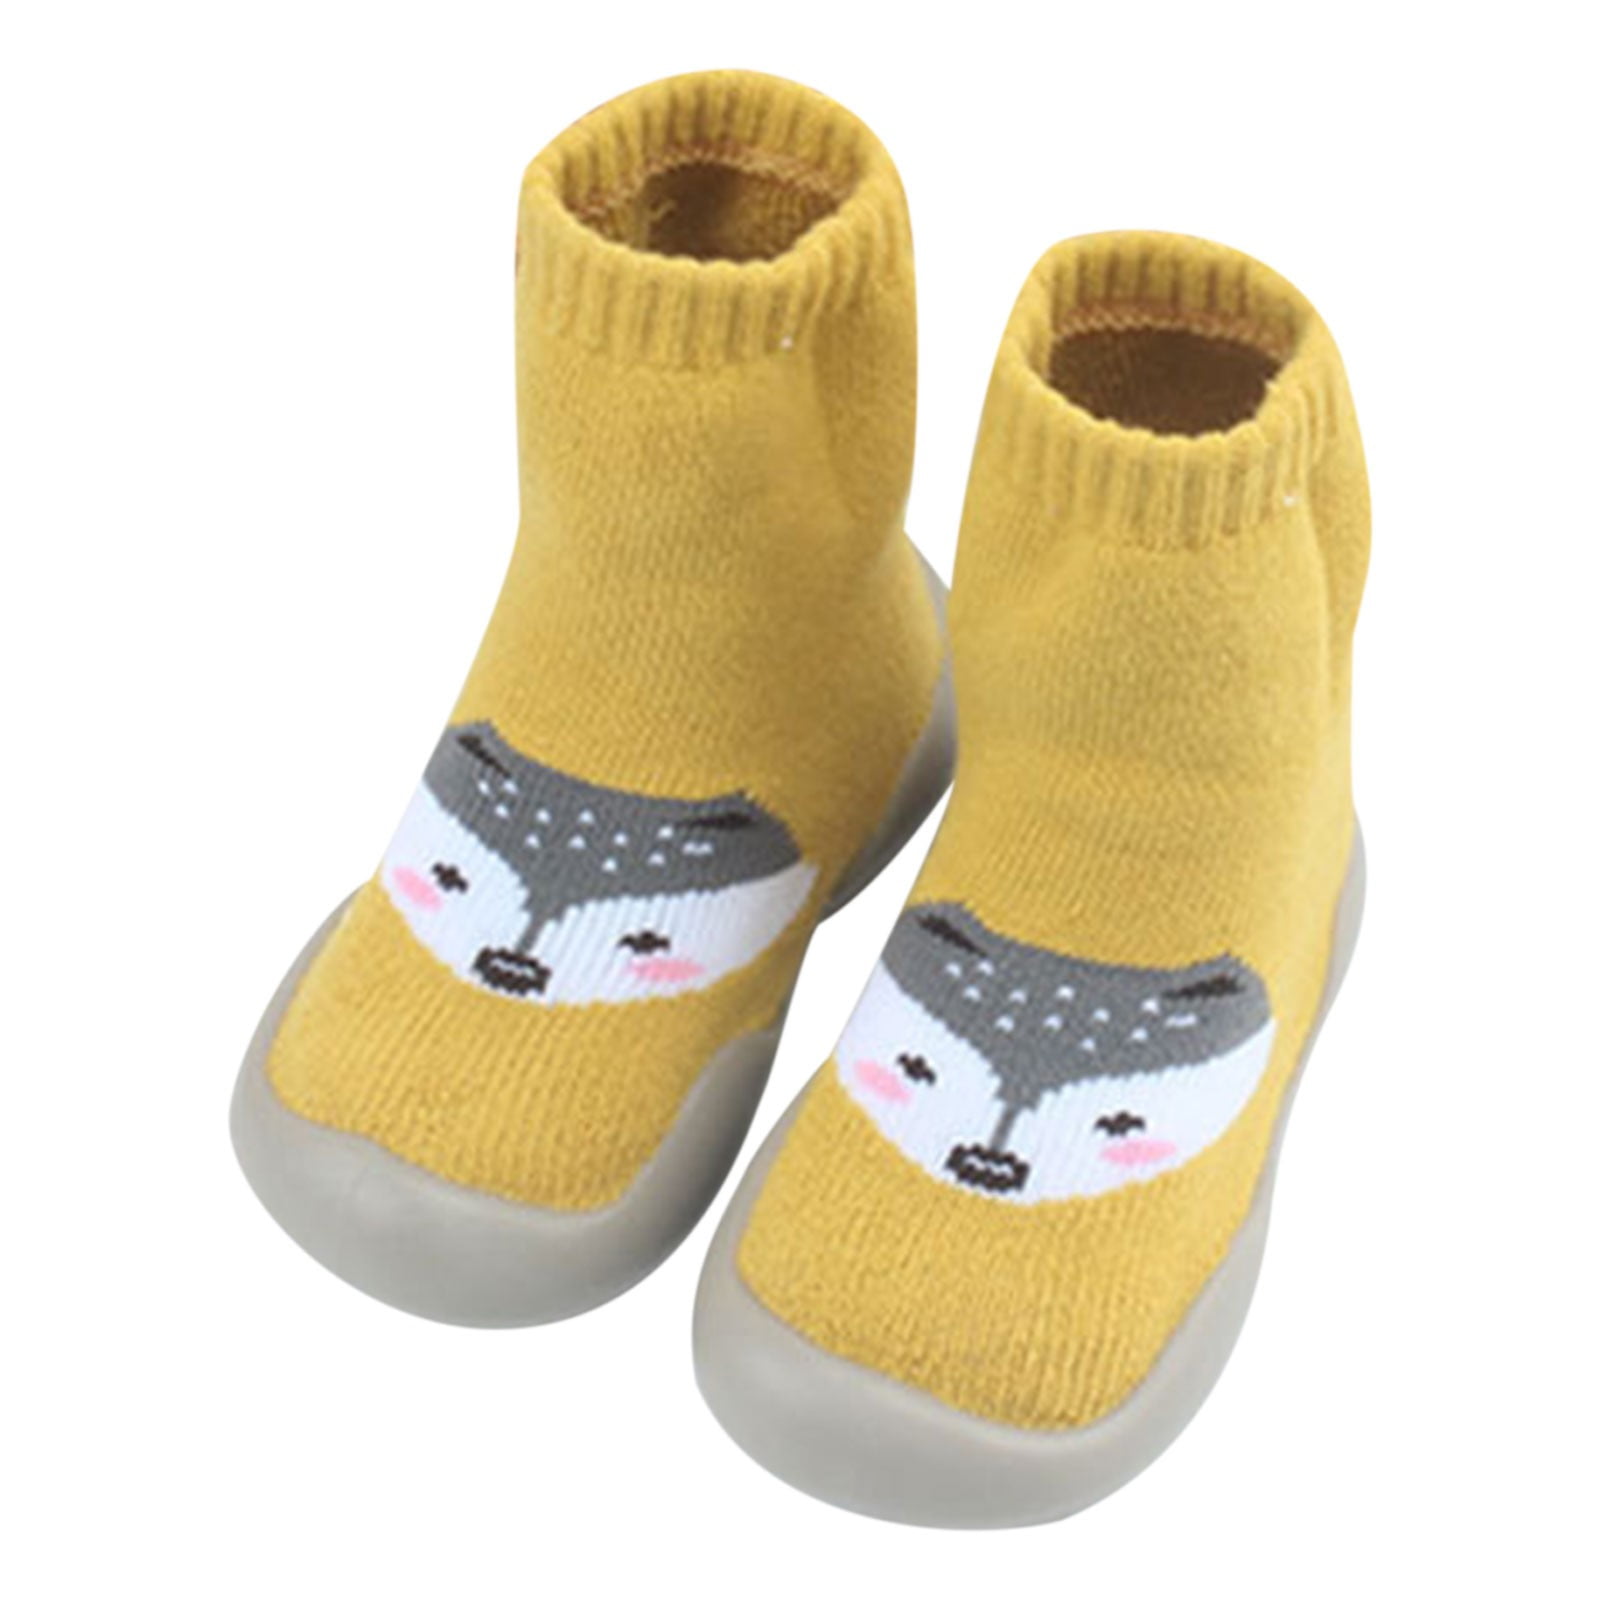 Baby Toddler Sock Shoes Non-Skid Slipper with Rubber Soft Sole Breathable Cotton Walking Shoes for Infant Girls Boys 